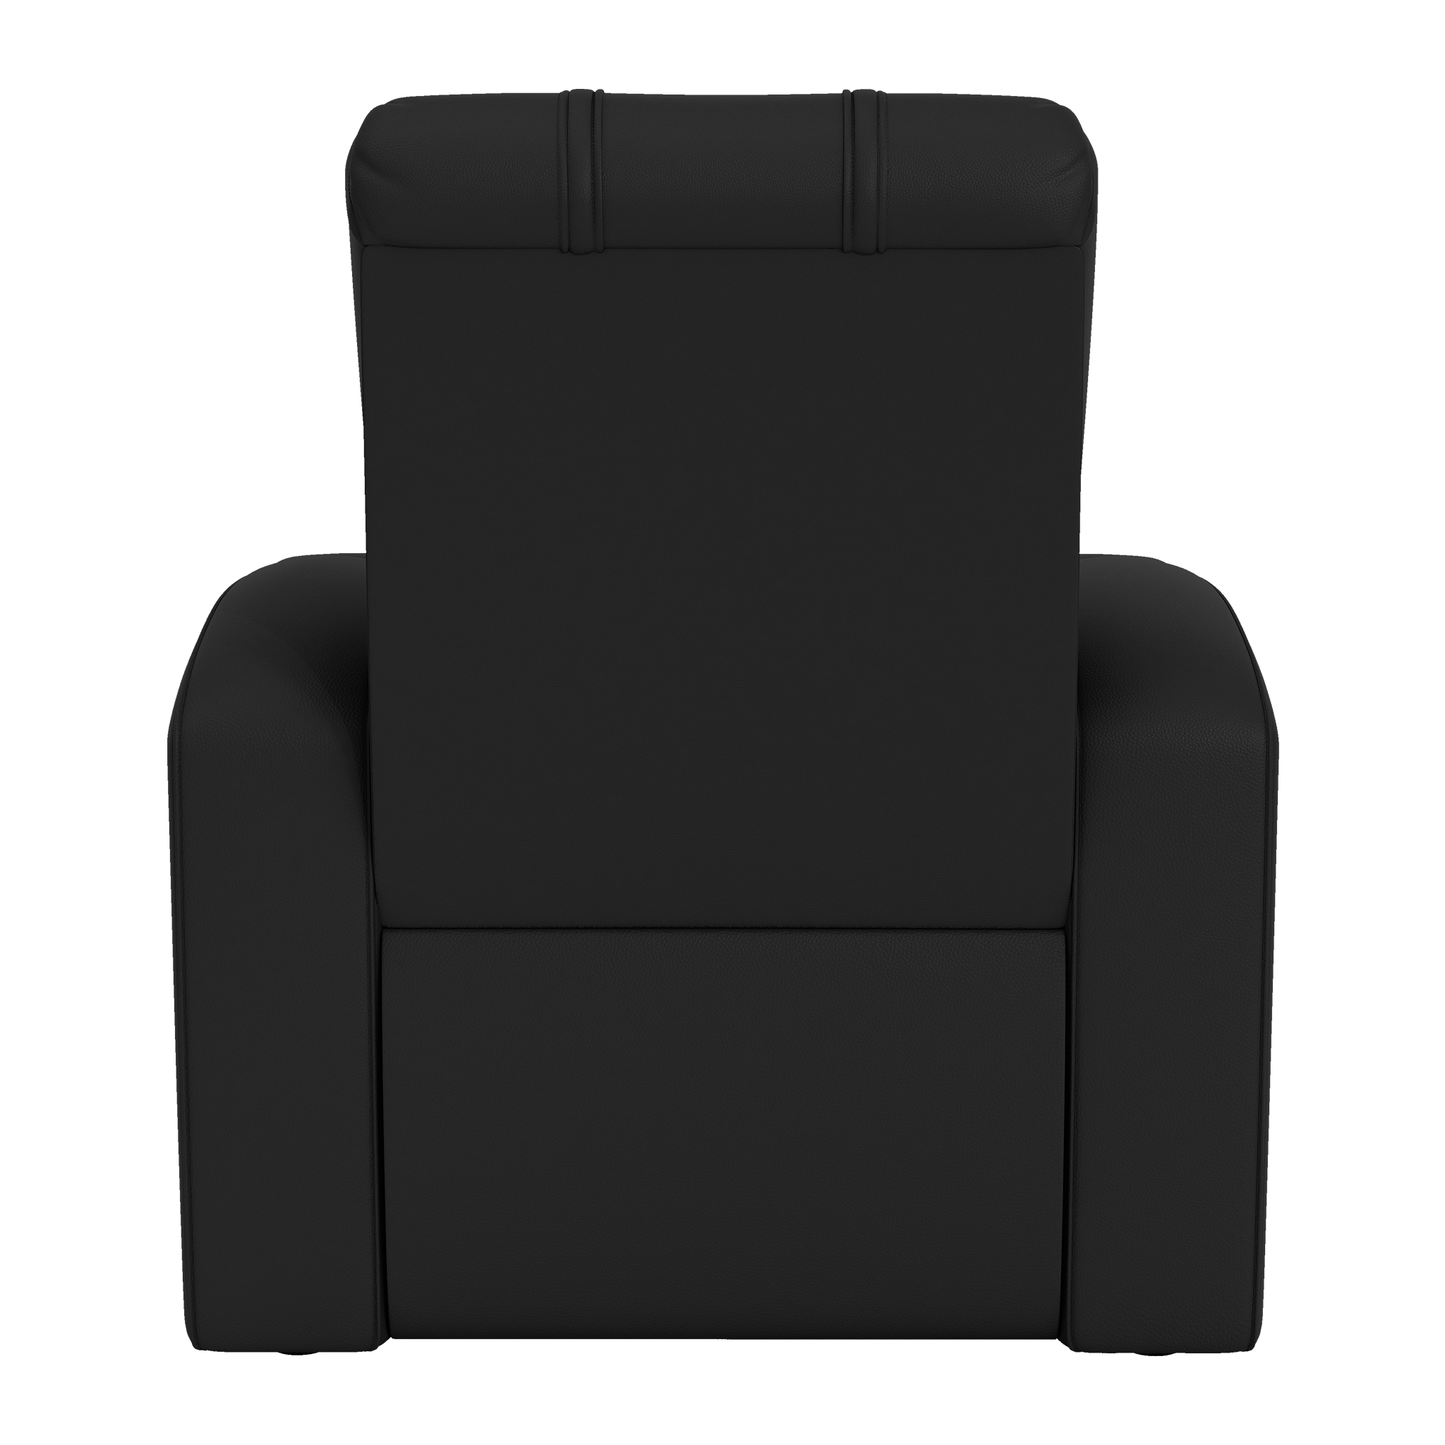 Relax Home Theater Recliner with Tampa Bay Buccaneers Classic Logo